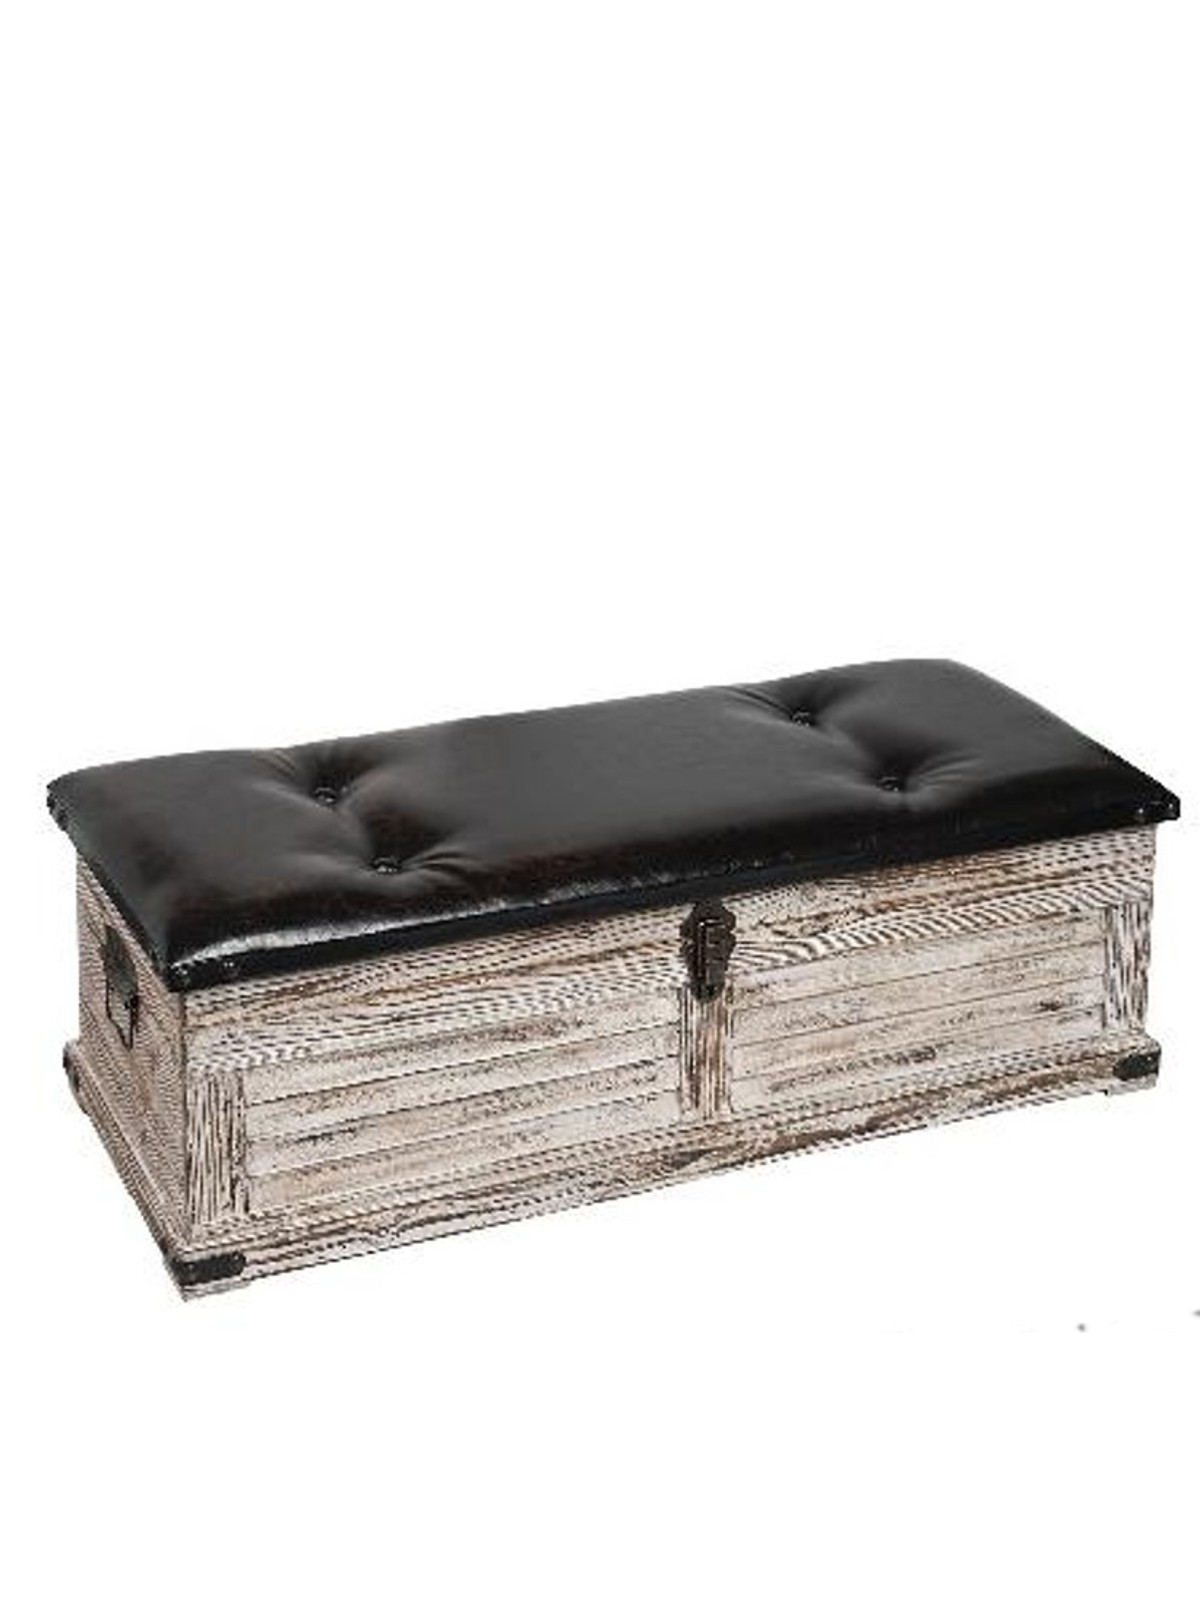 Wooden trunk with leatherette pillow